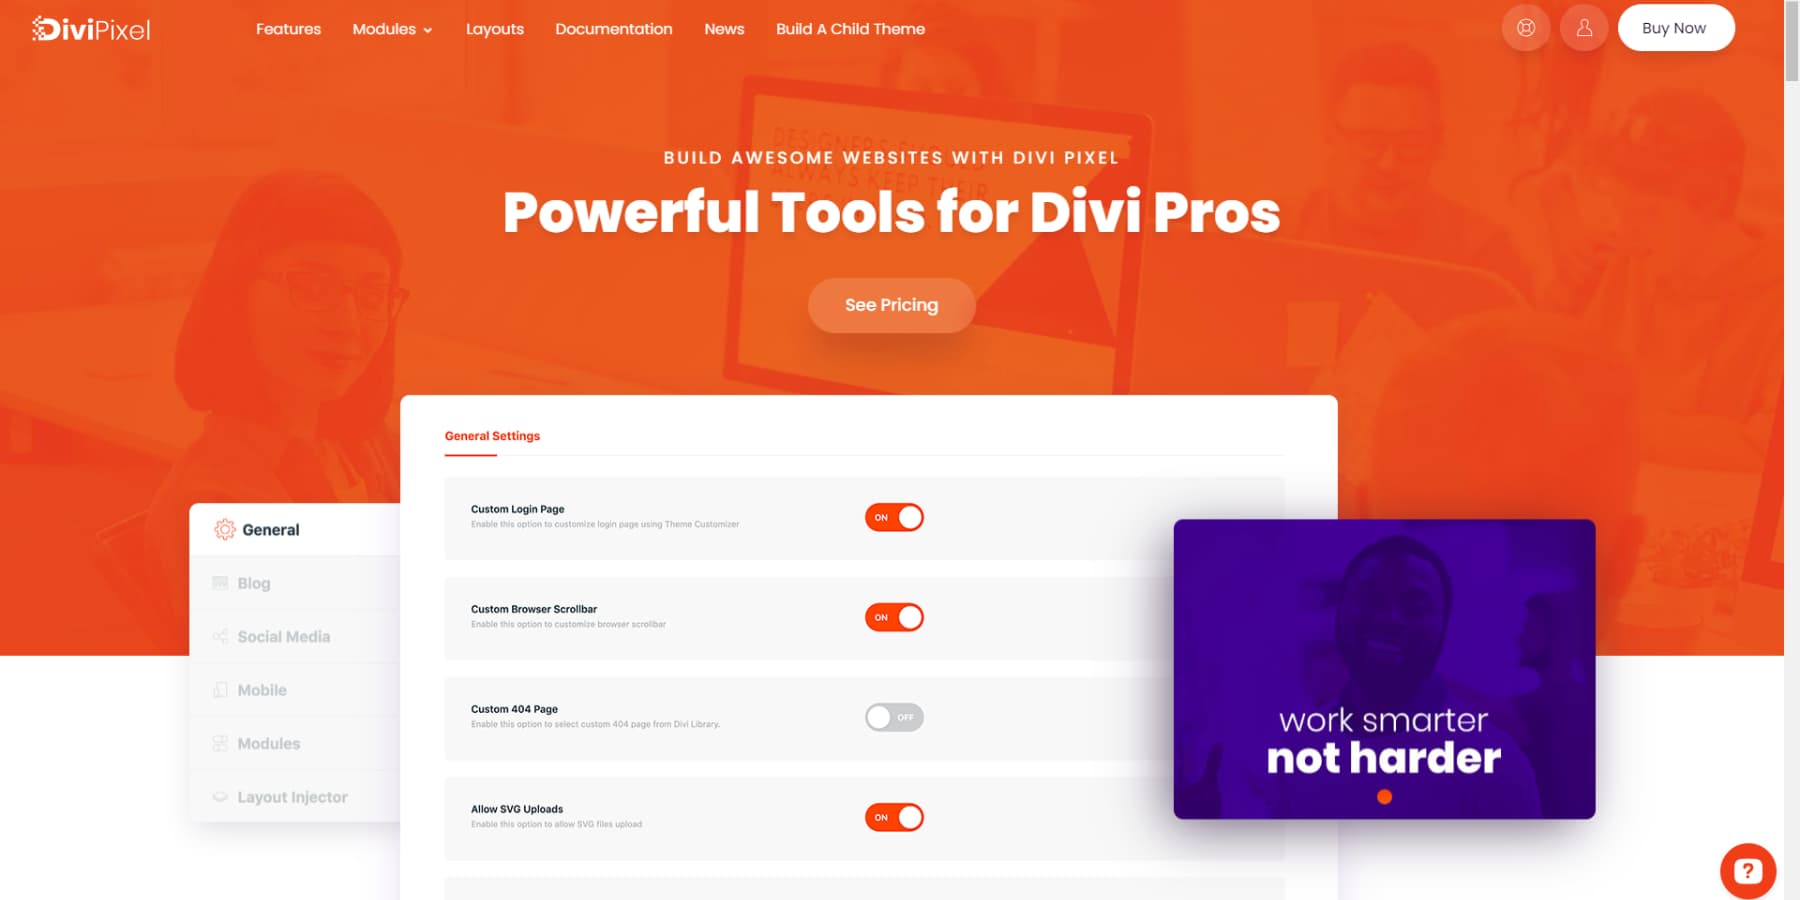 A screenshot of Divi Pixel's home page